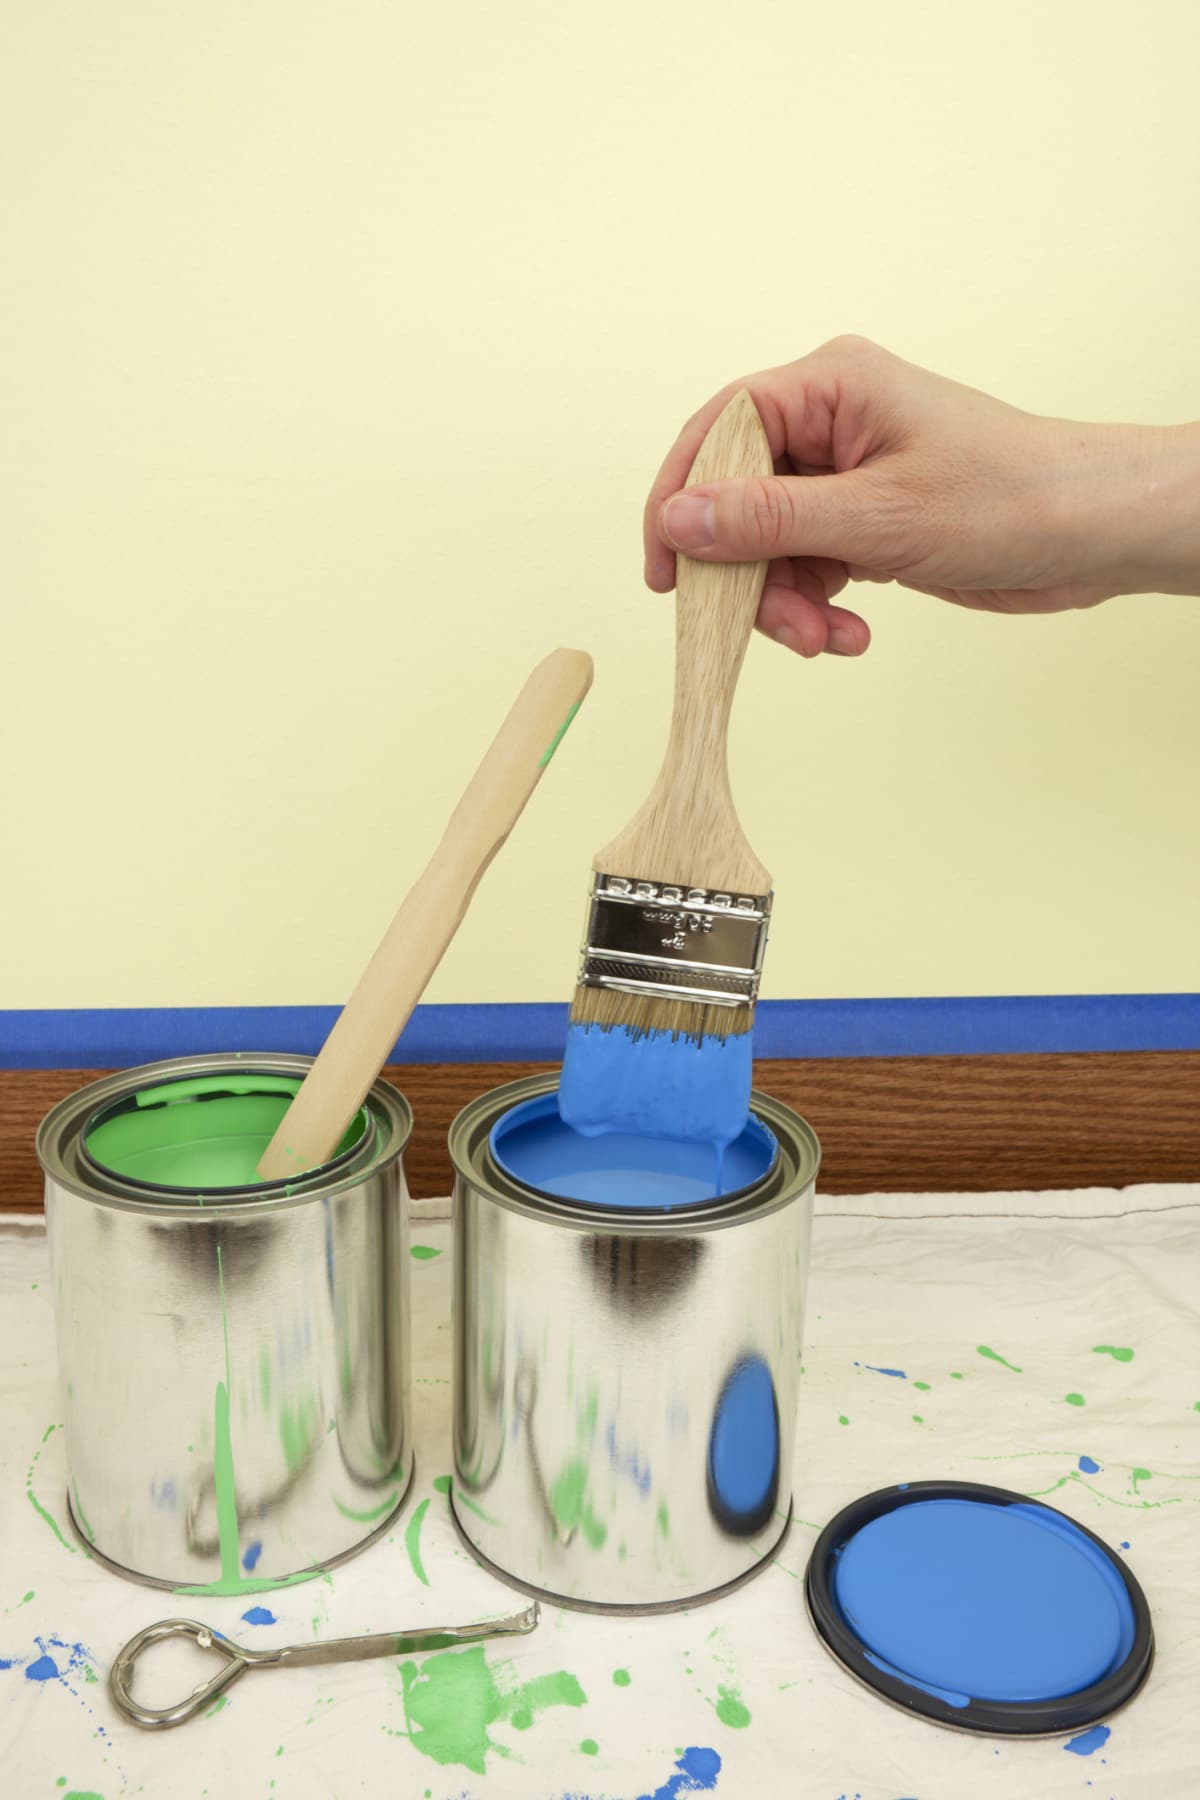 Person preparing to paint wall trim; dipping paint brush in blue paint